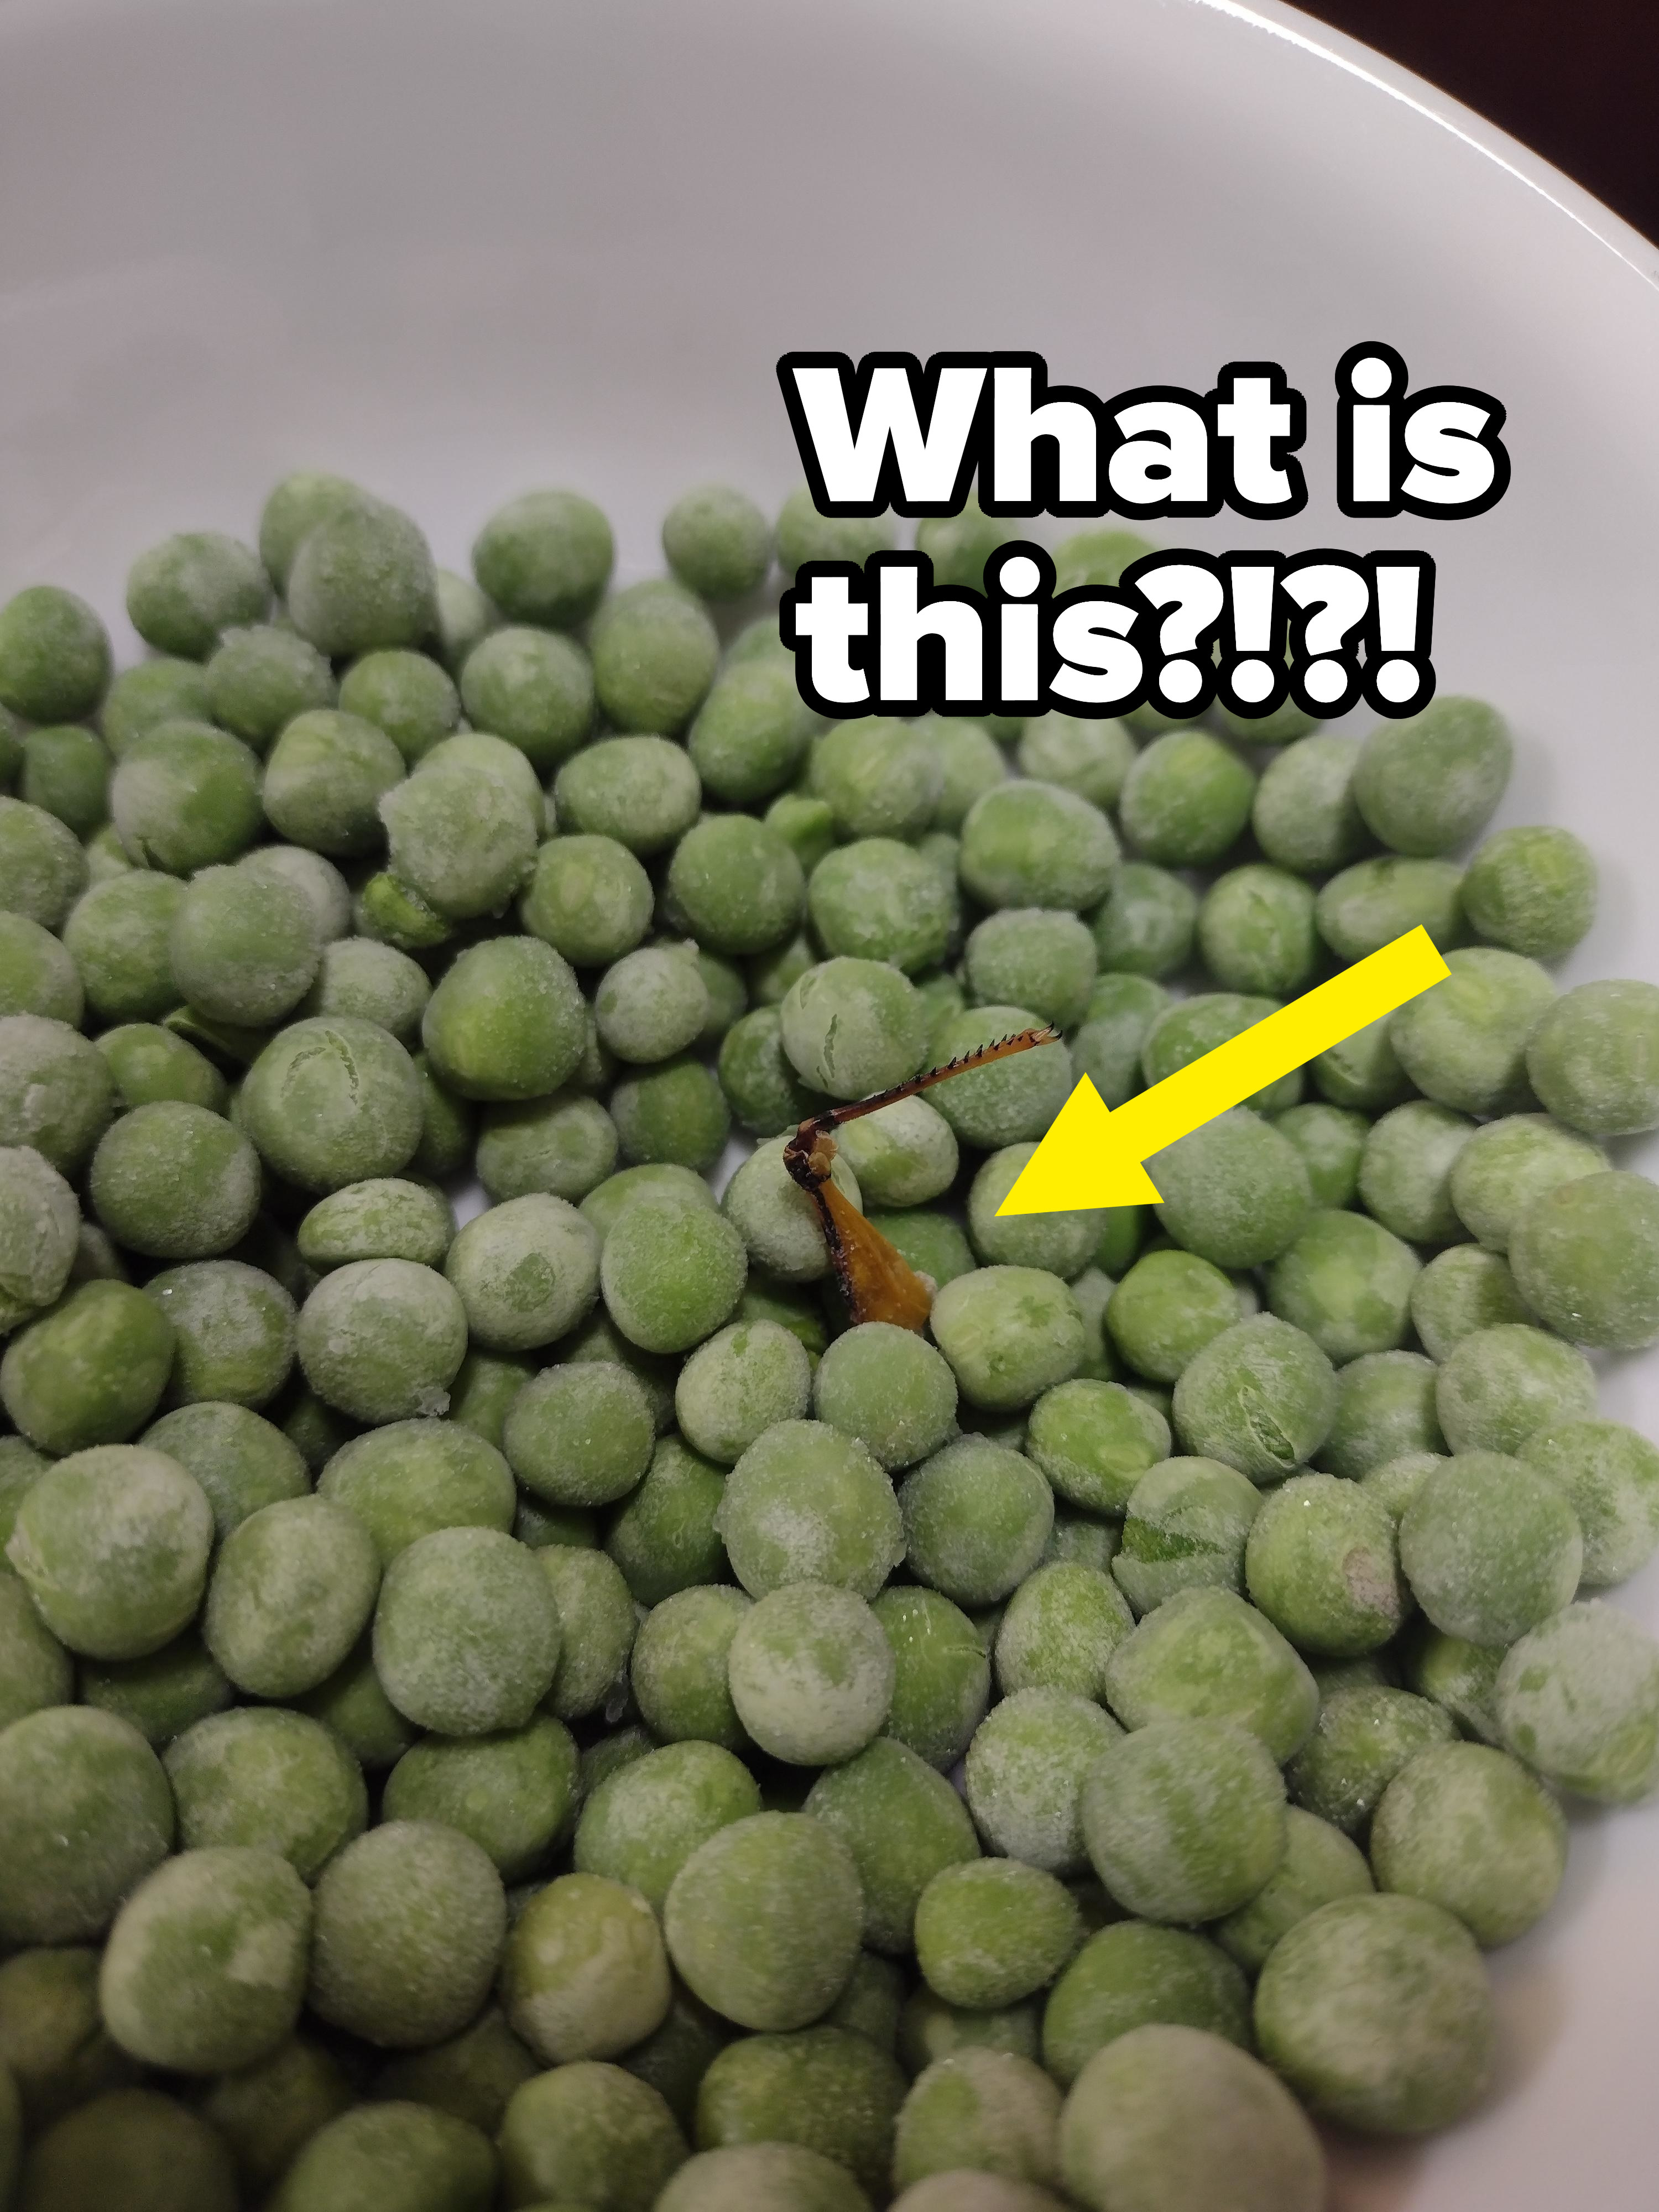 An insect amid frozen peas